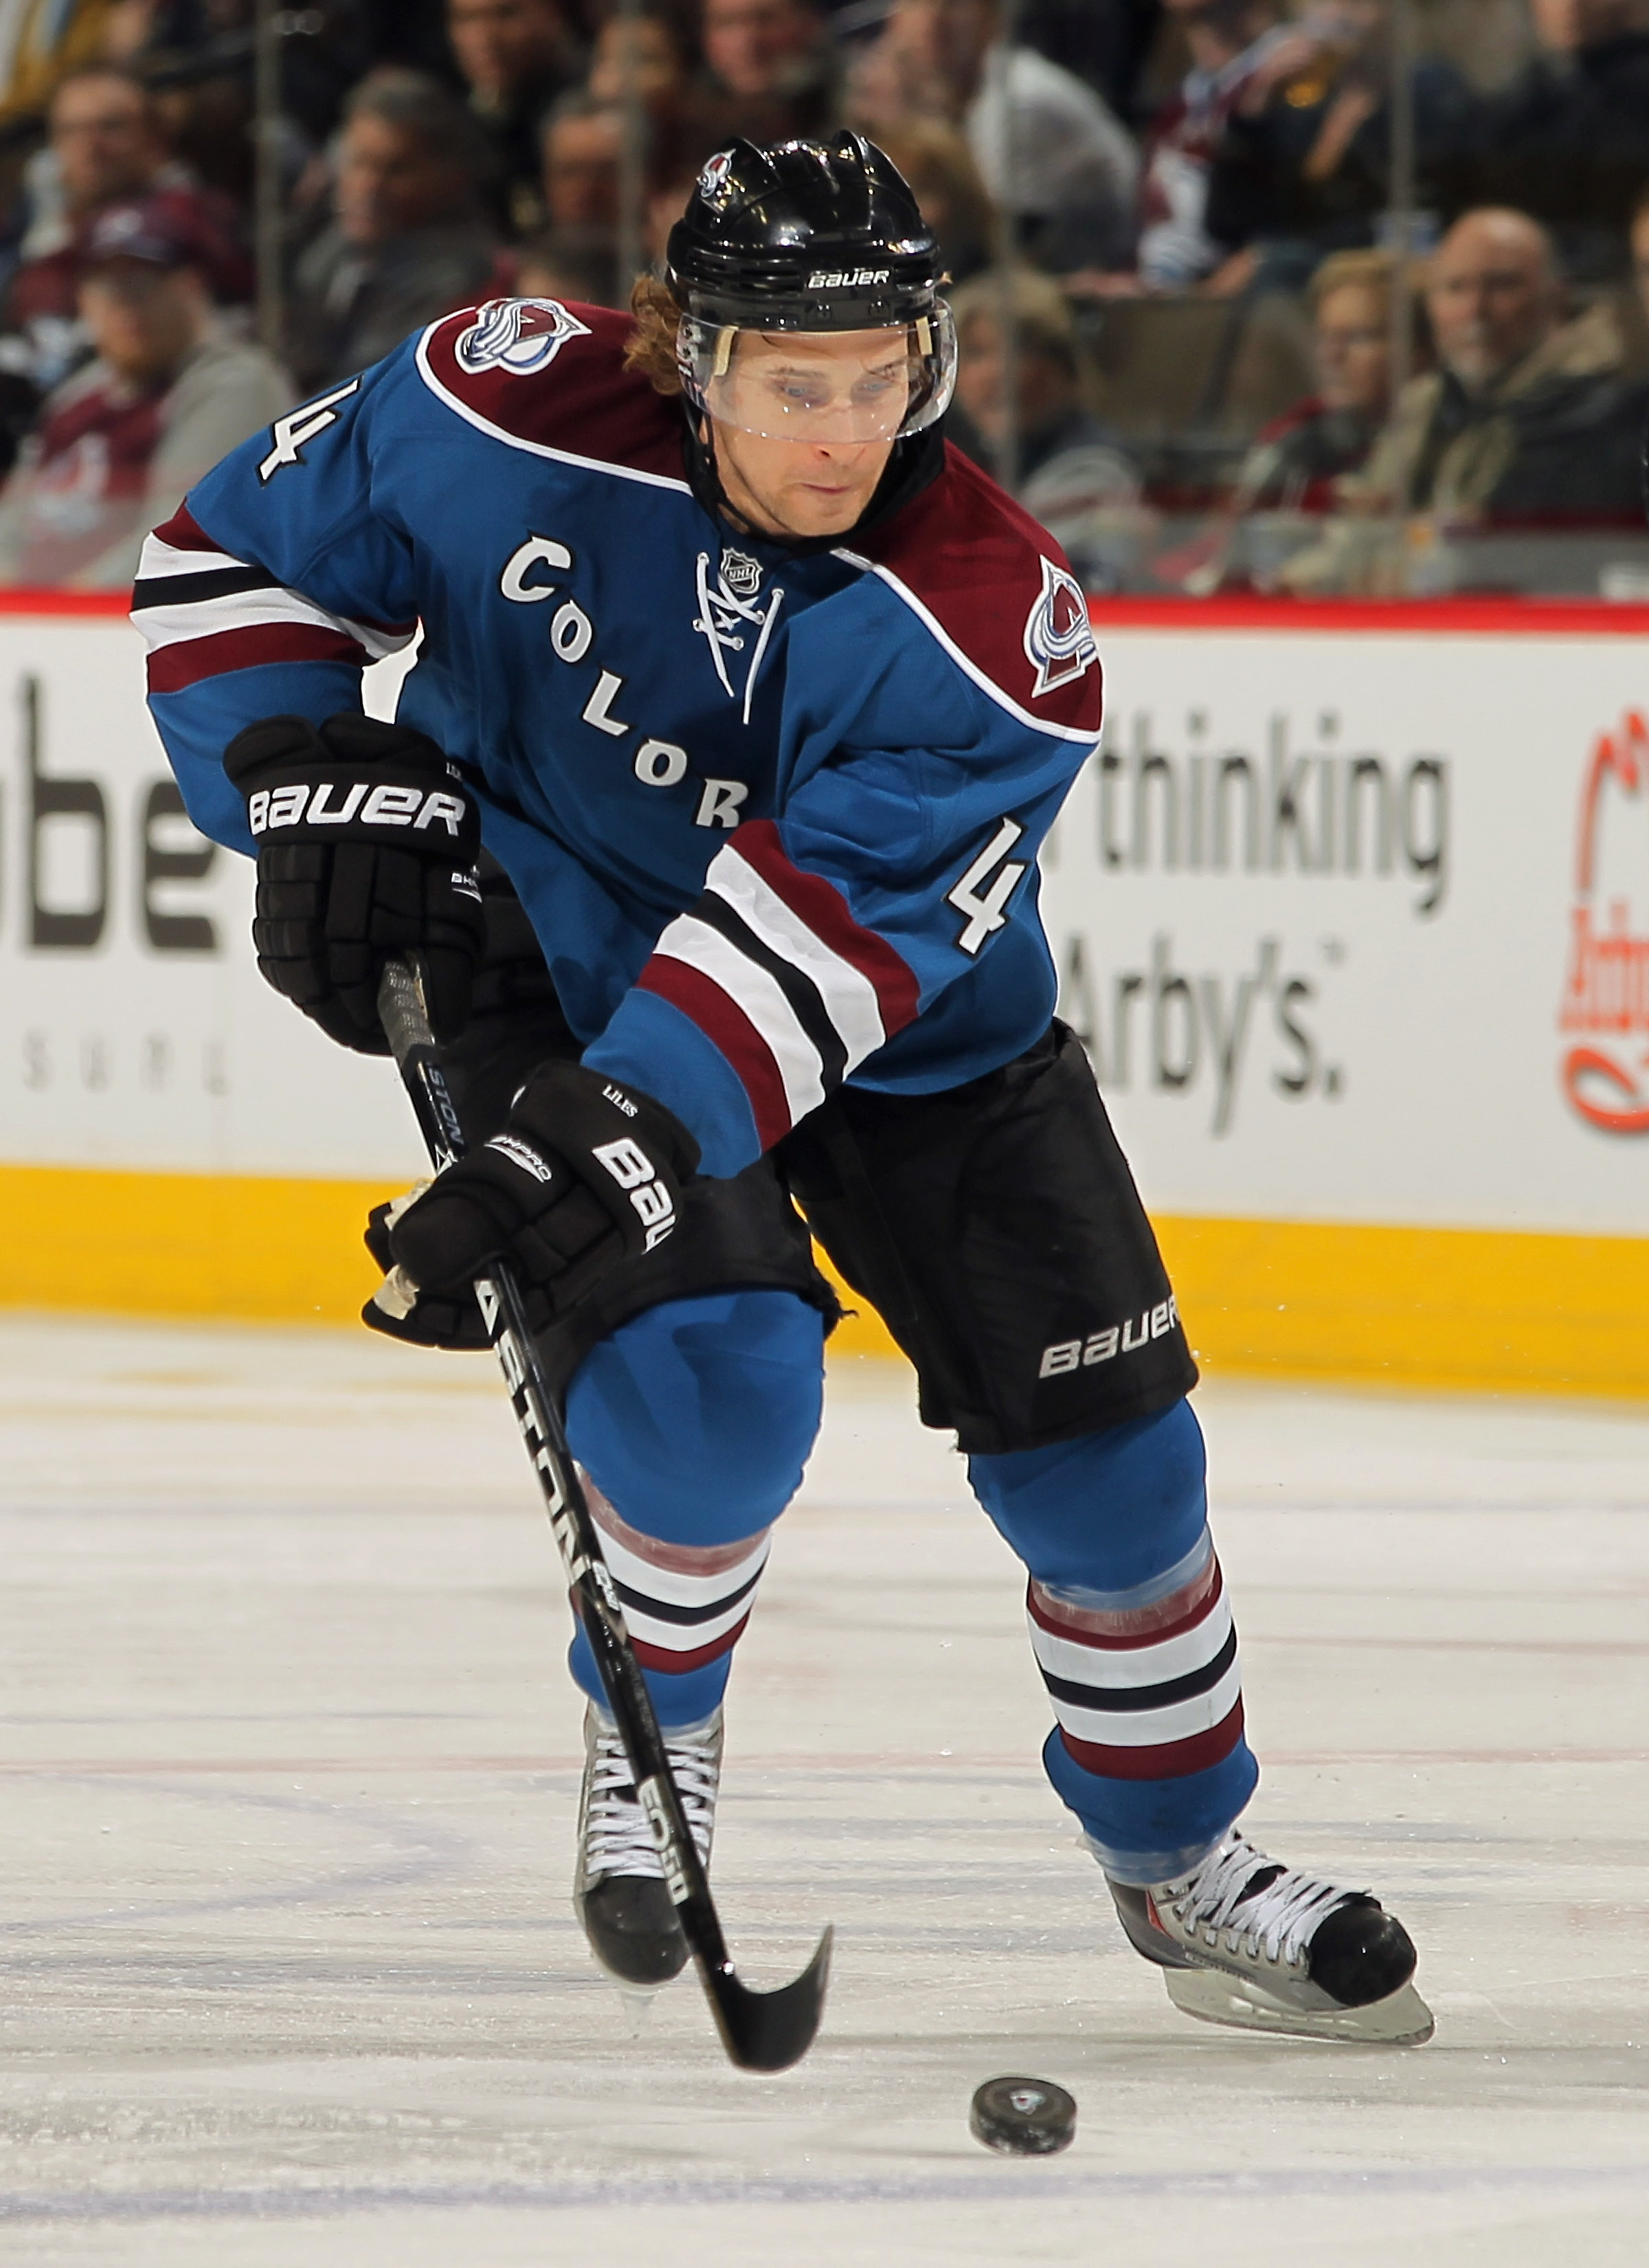 Colorado Avalanche: Is Jarome Iginla Pulling his Weight?